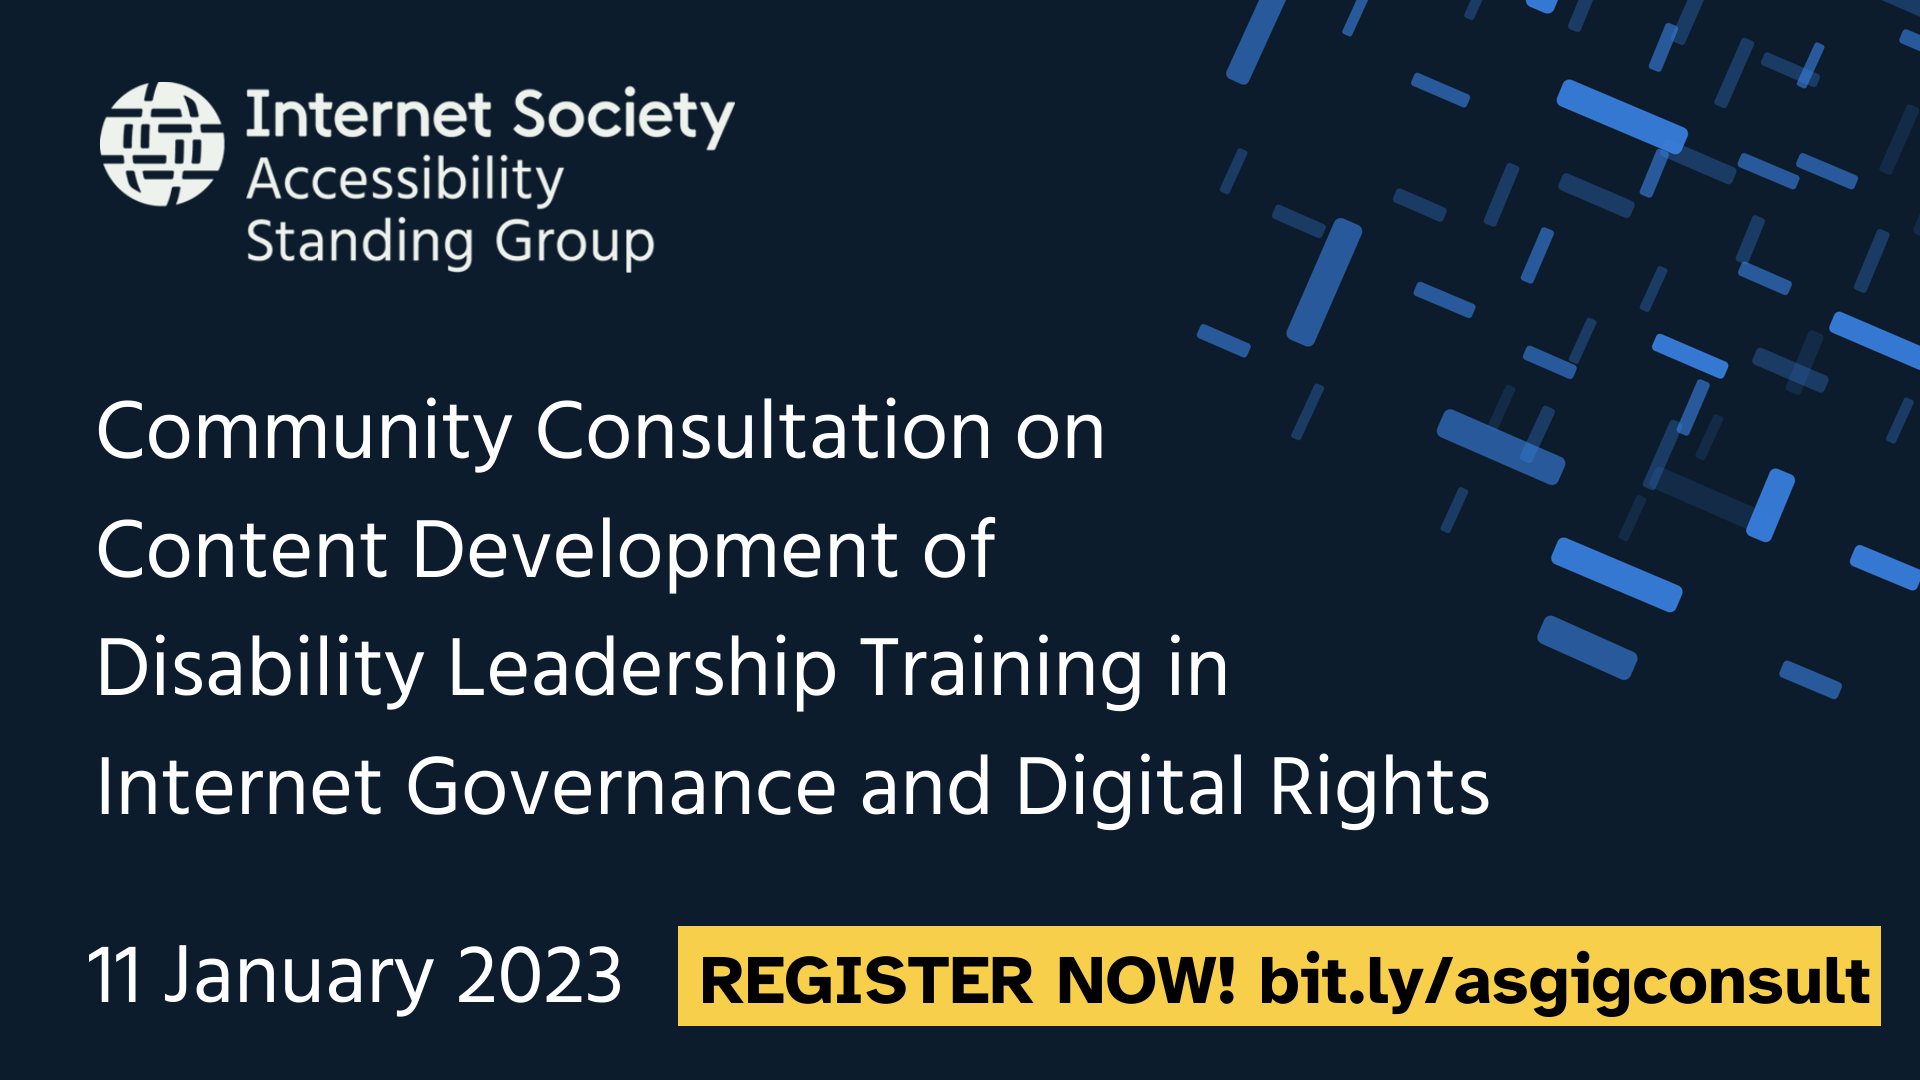 Community Consultation on Content Development of Disability Leadership Training In Internet Governance and Digital Rights - Event poster.